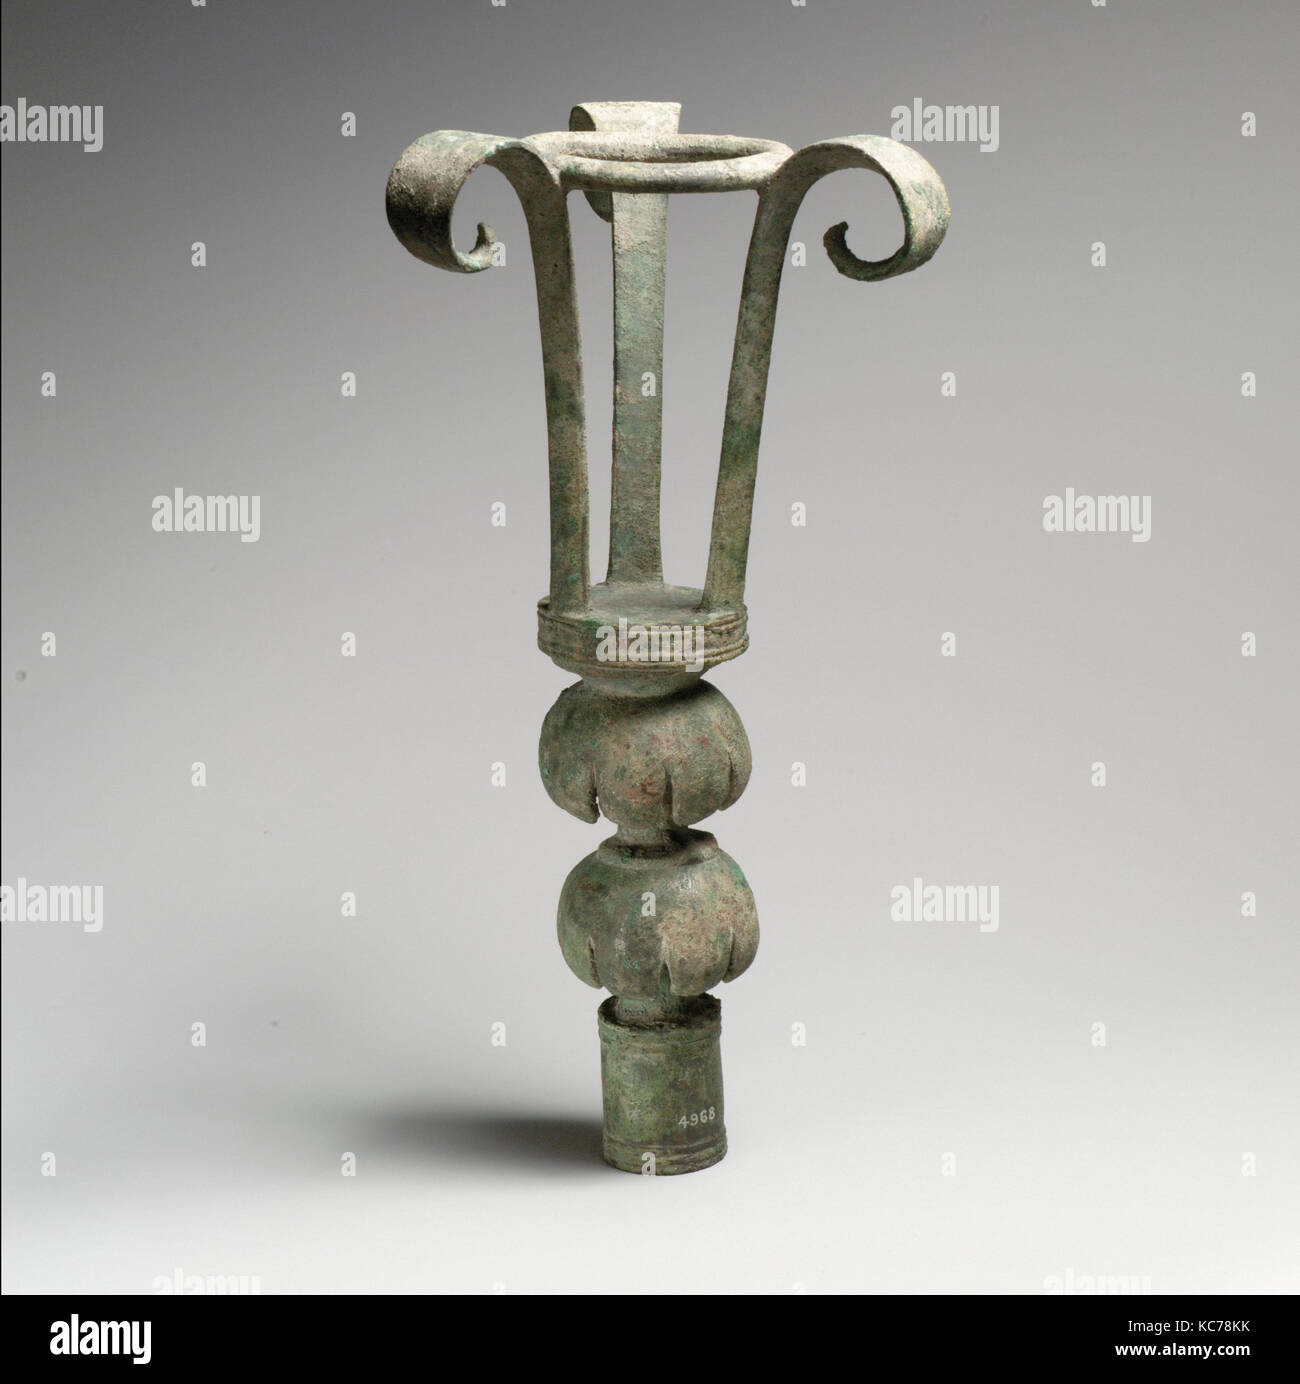 Lampstand, Cypriot, Bronze, H.: 9 7/8 in. (25.1 cm), Bronzes Stock Photo